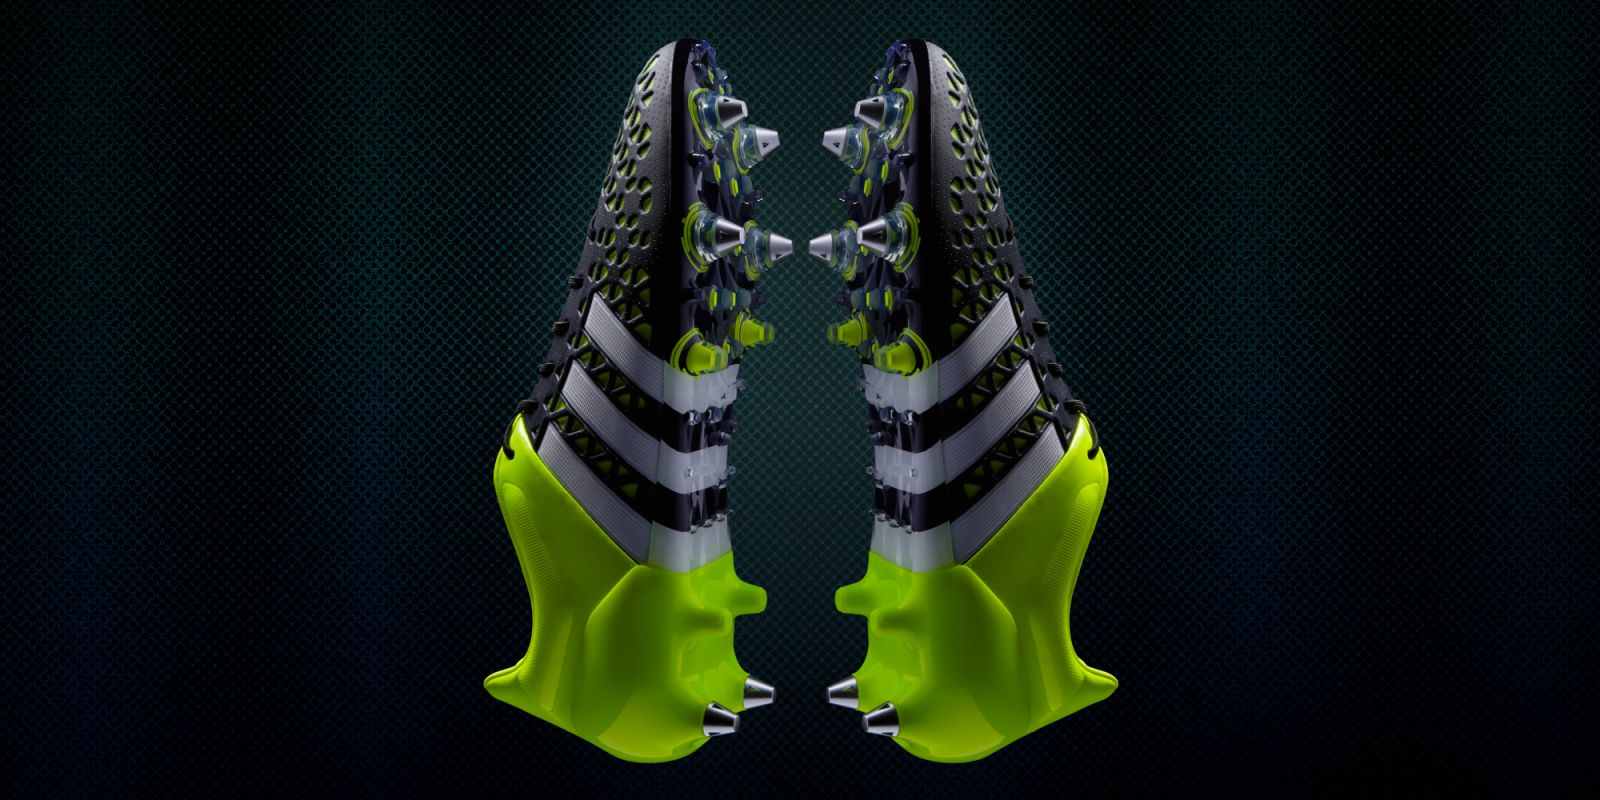 adidas introduce X si ACE #BETHEDIFFERENCE